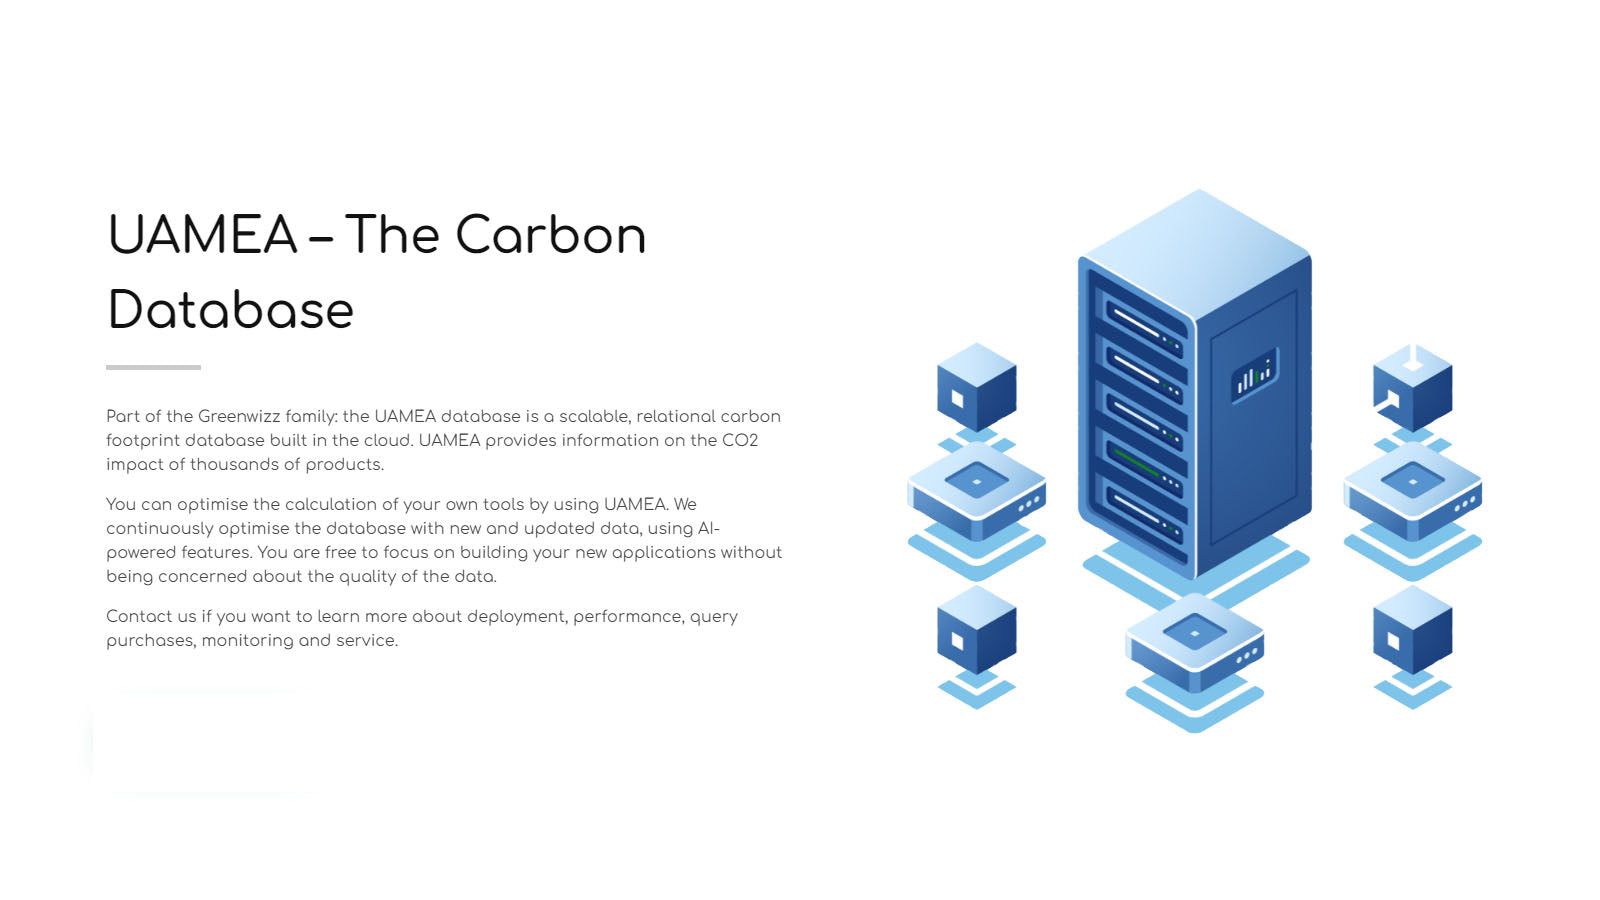 The Carbon Database